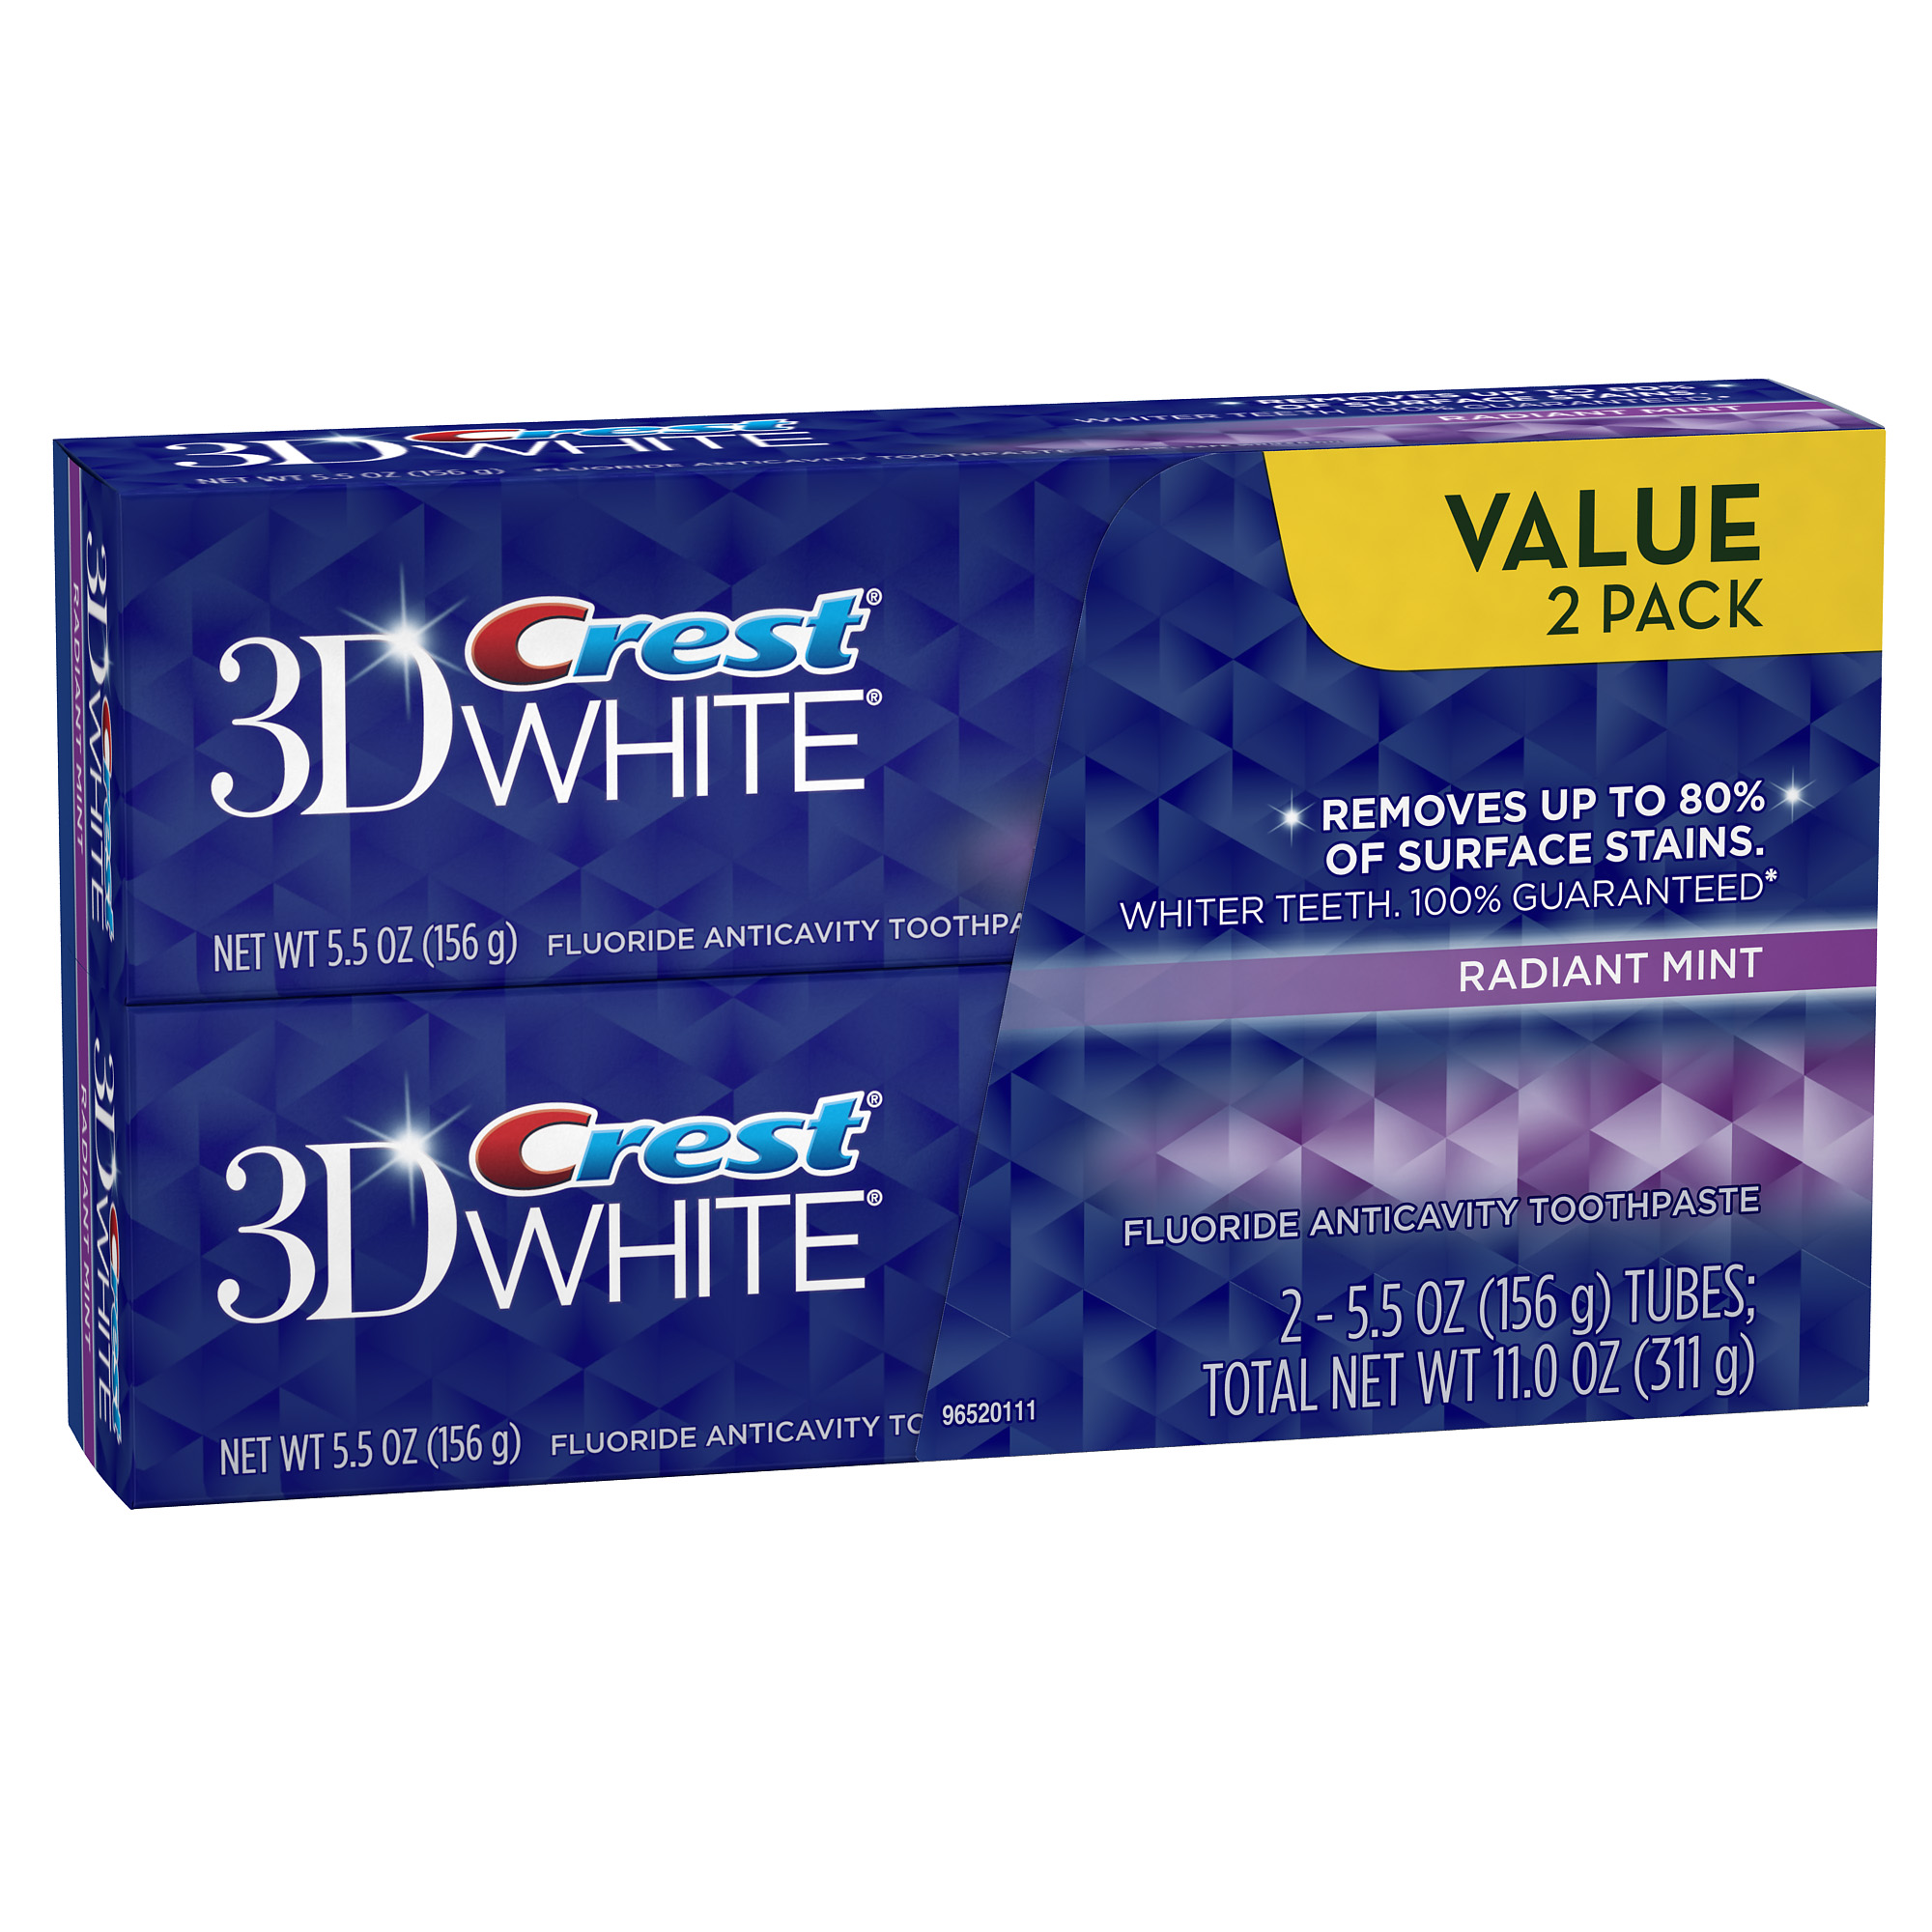 Crest 3D White Radiant Mint Flavor Whitening Toothpaste Twin Pack 11 Oz - image 5 of 11